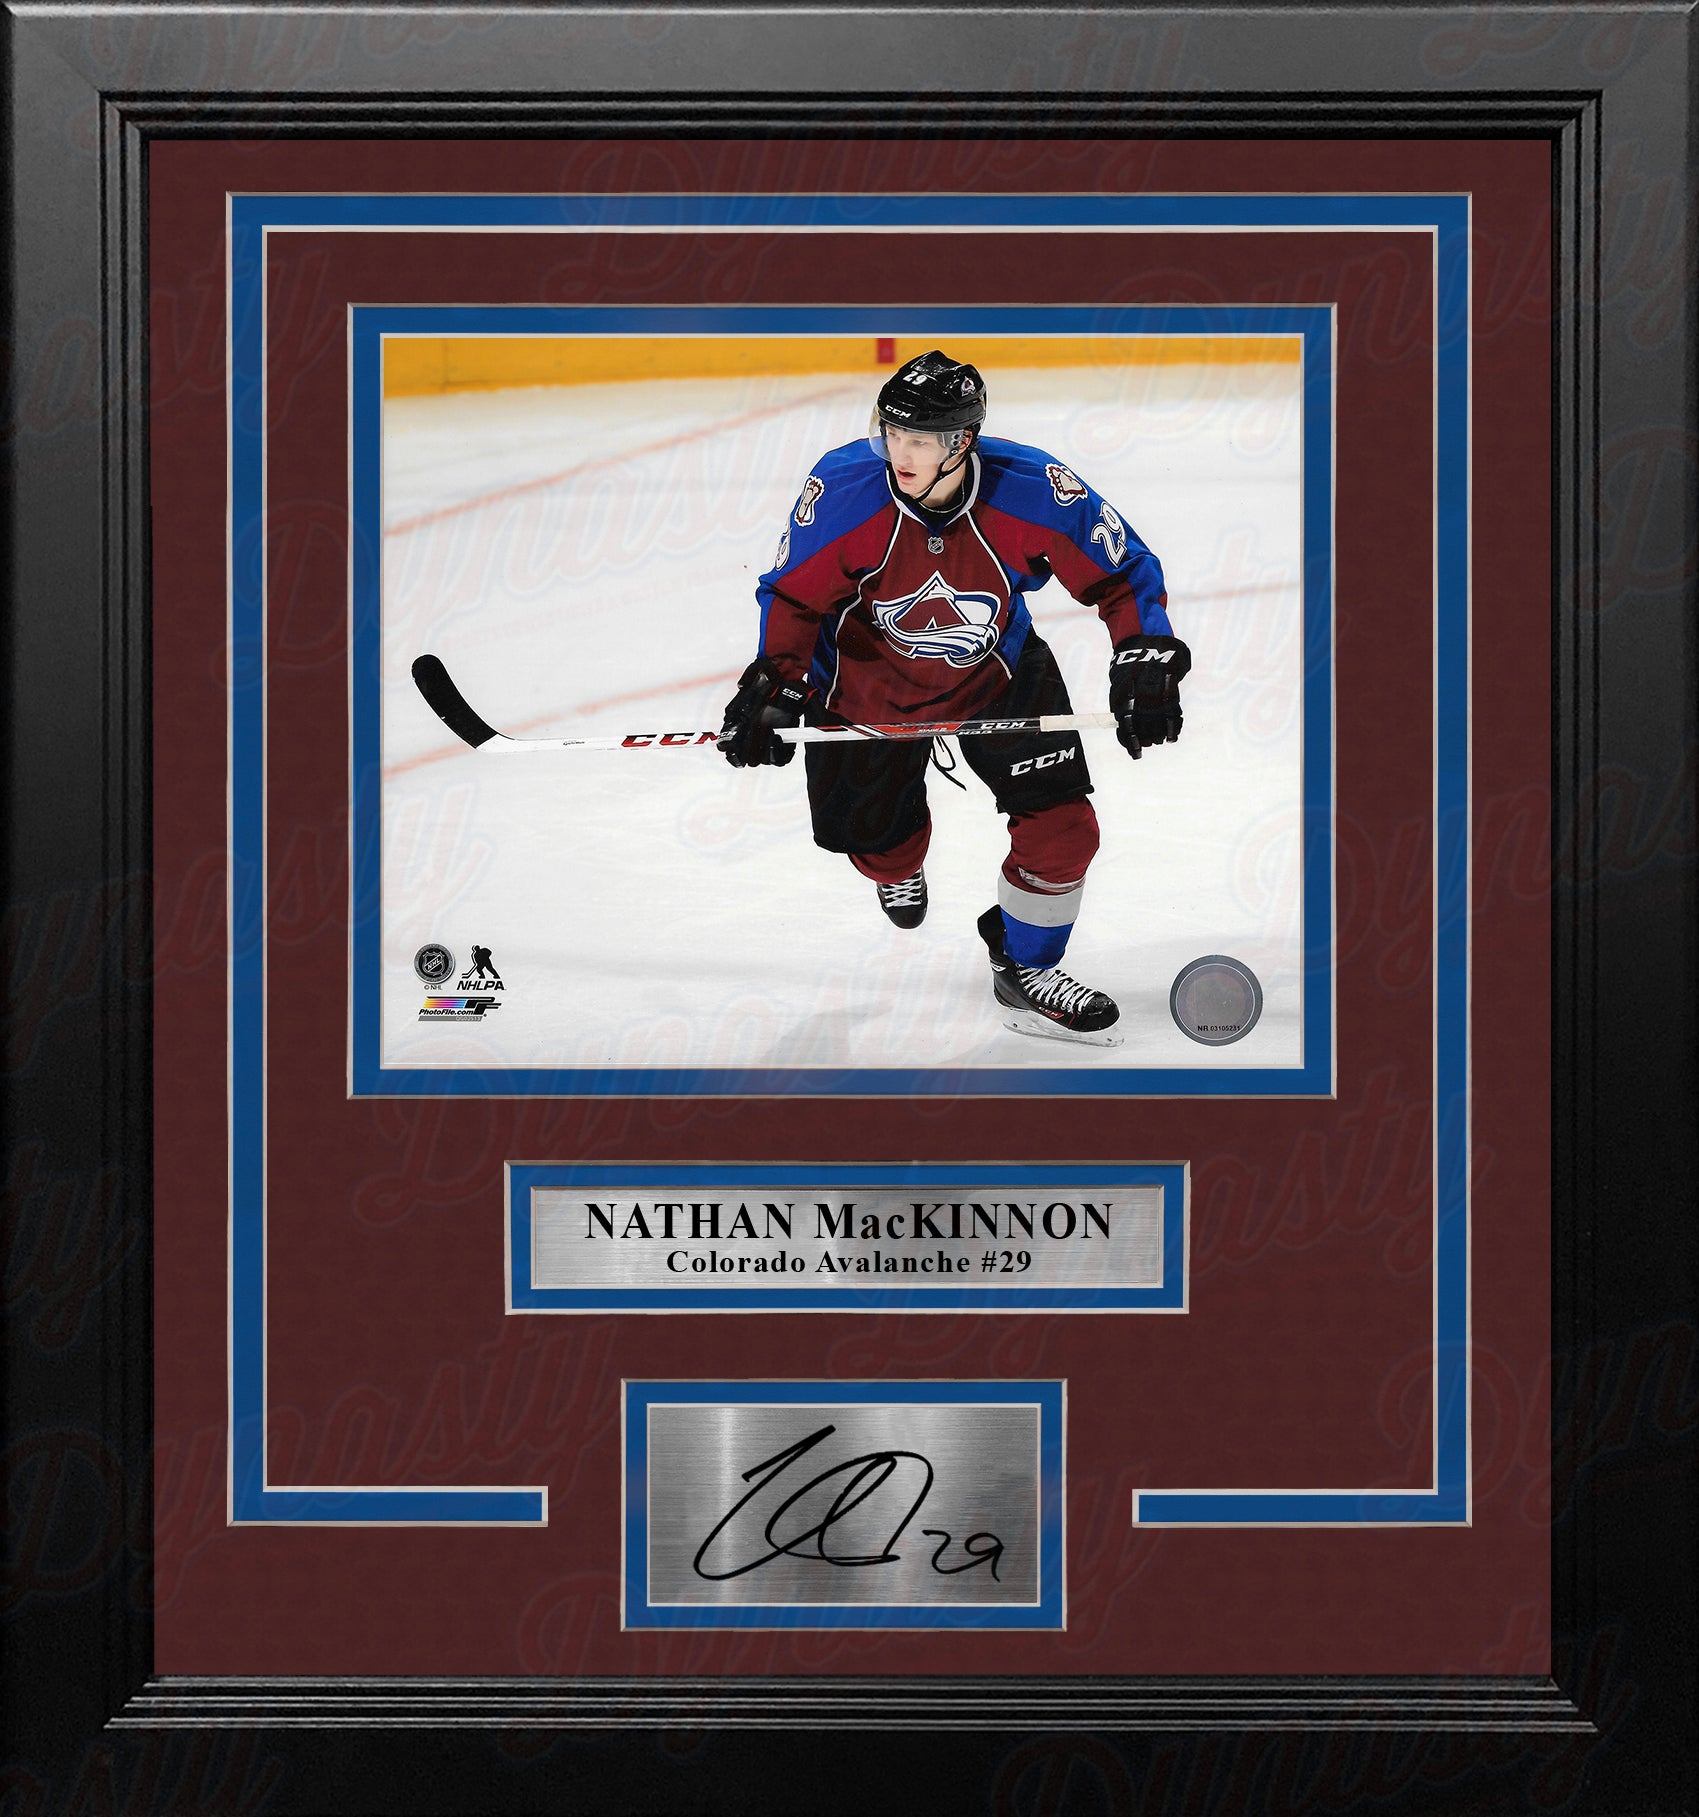 Nathan MacKinnon in Action Colorado Avalanche 8" x 10" Framed Hockey Photo with Engraved Autograph - Dynasty Sports & Framing 